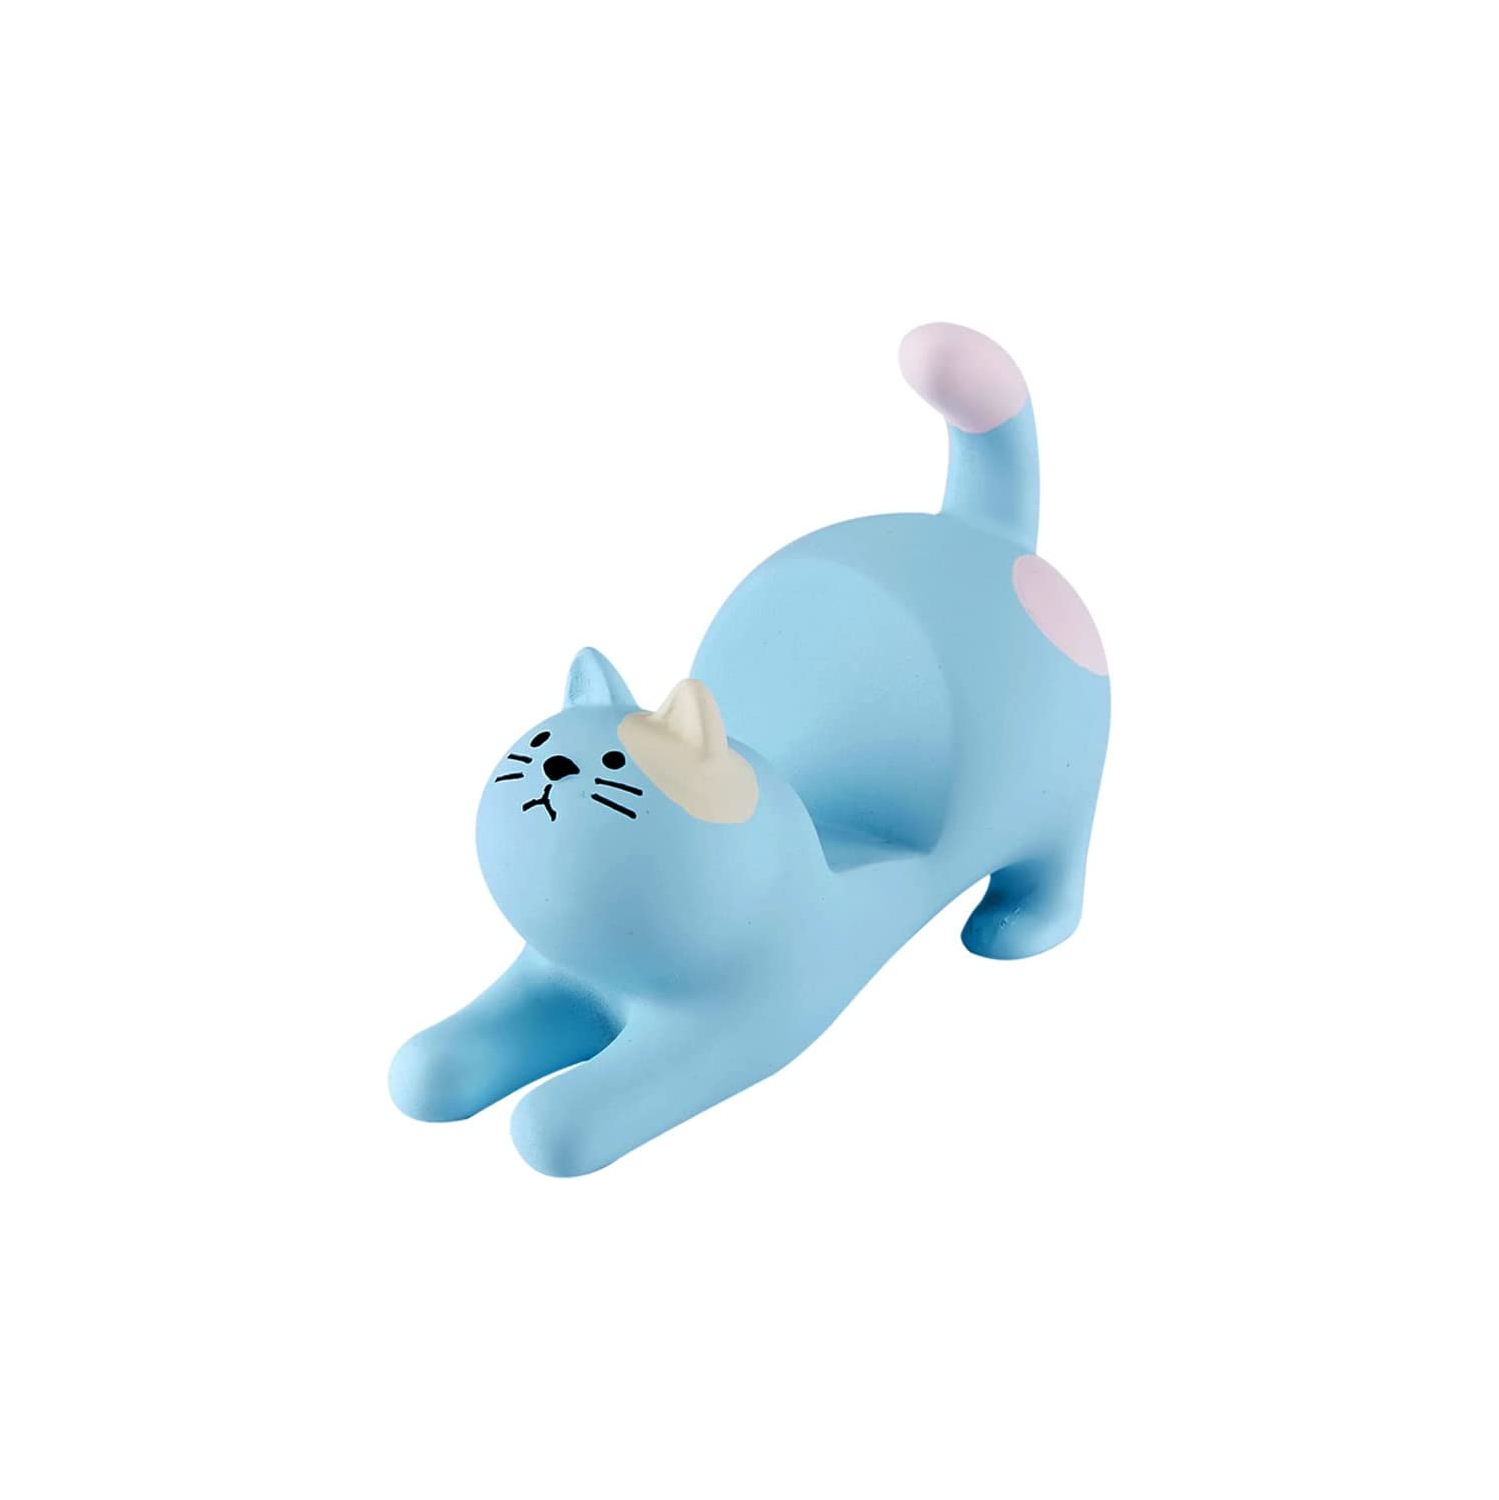 Cat Phone Stand, Cute Kawaii Phone Holder for Desk, Blue Smartphone Mount for iPad, iPhone, Huawei,Samsung,